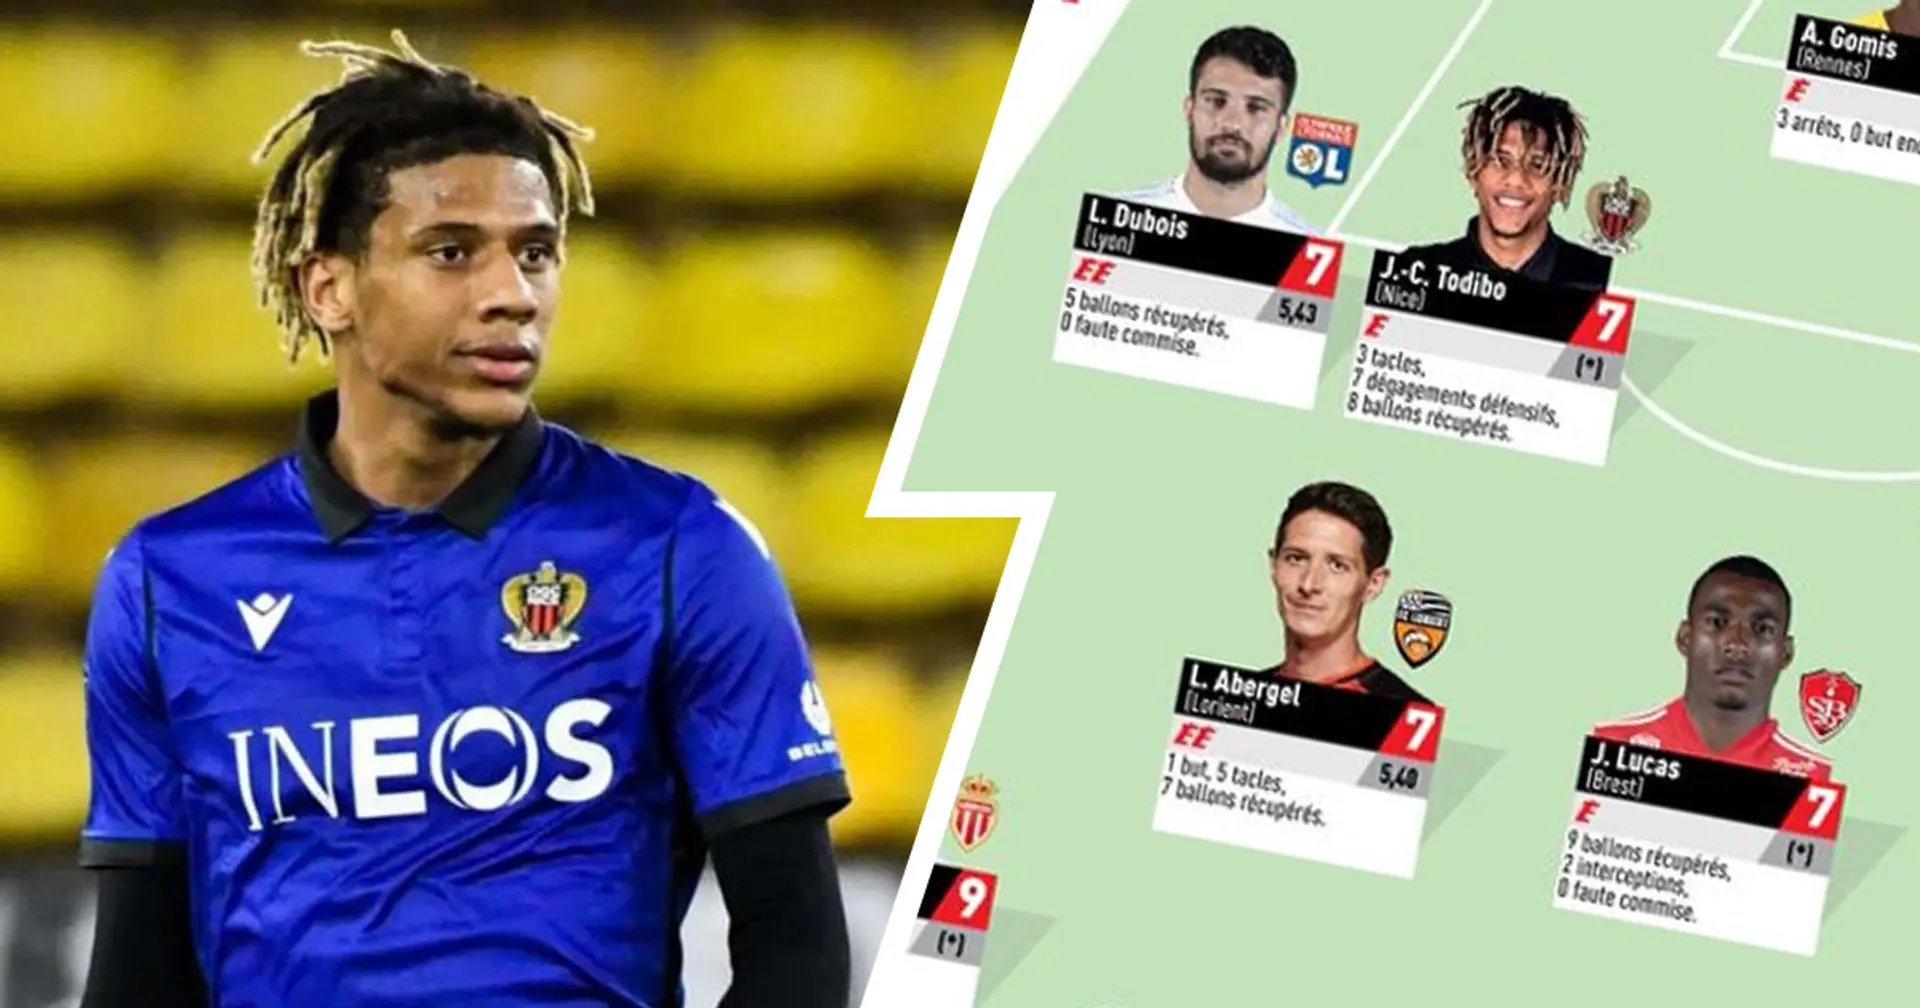 Todibo included in L'Equipe team of the week in Ligue 1 after solid defensive performance